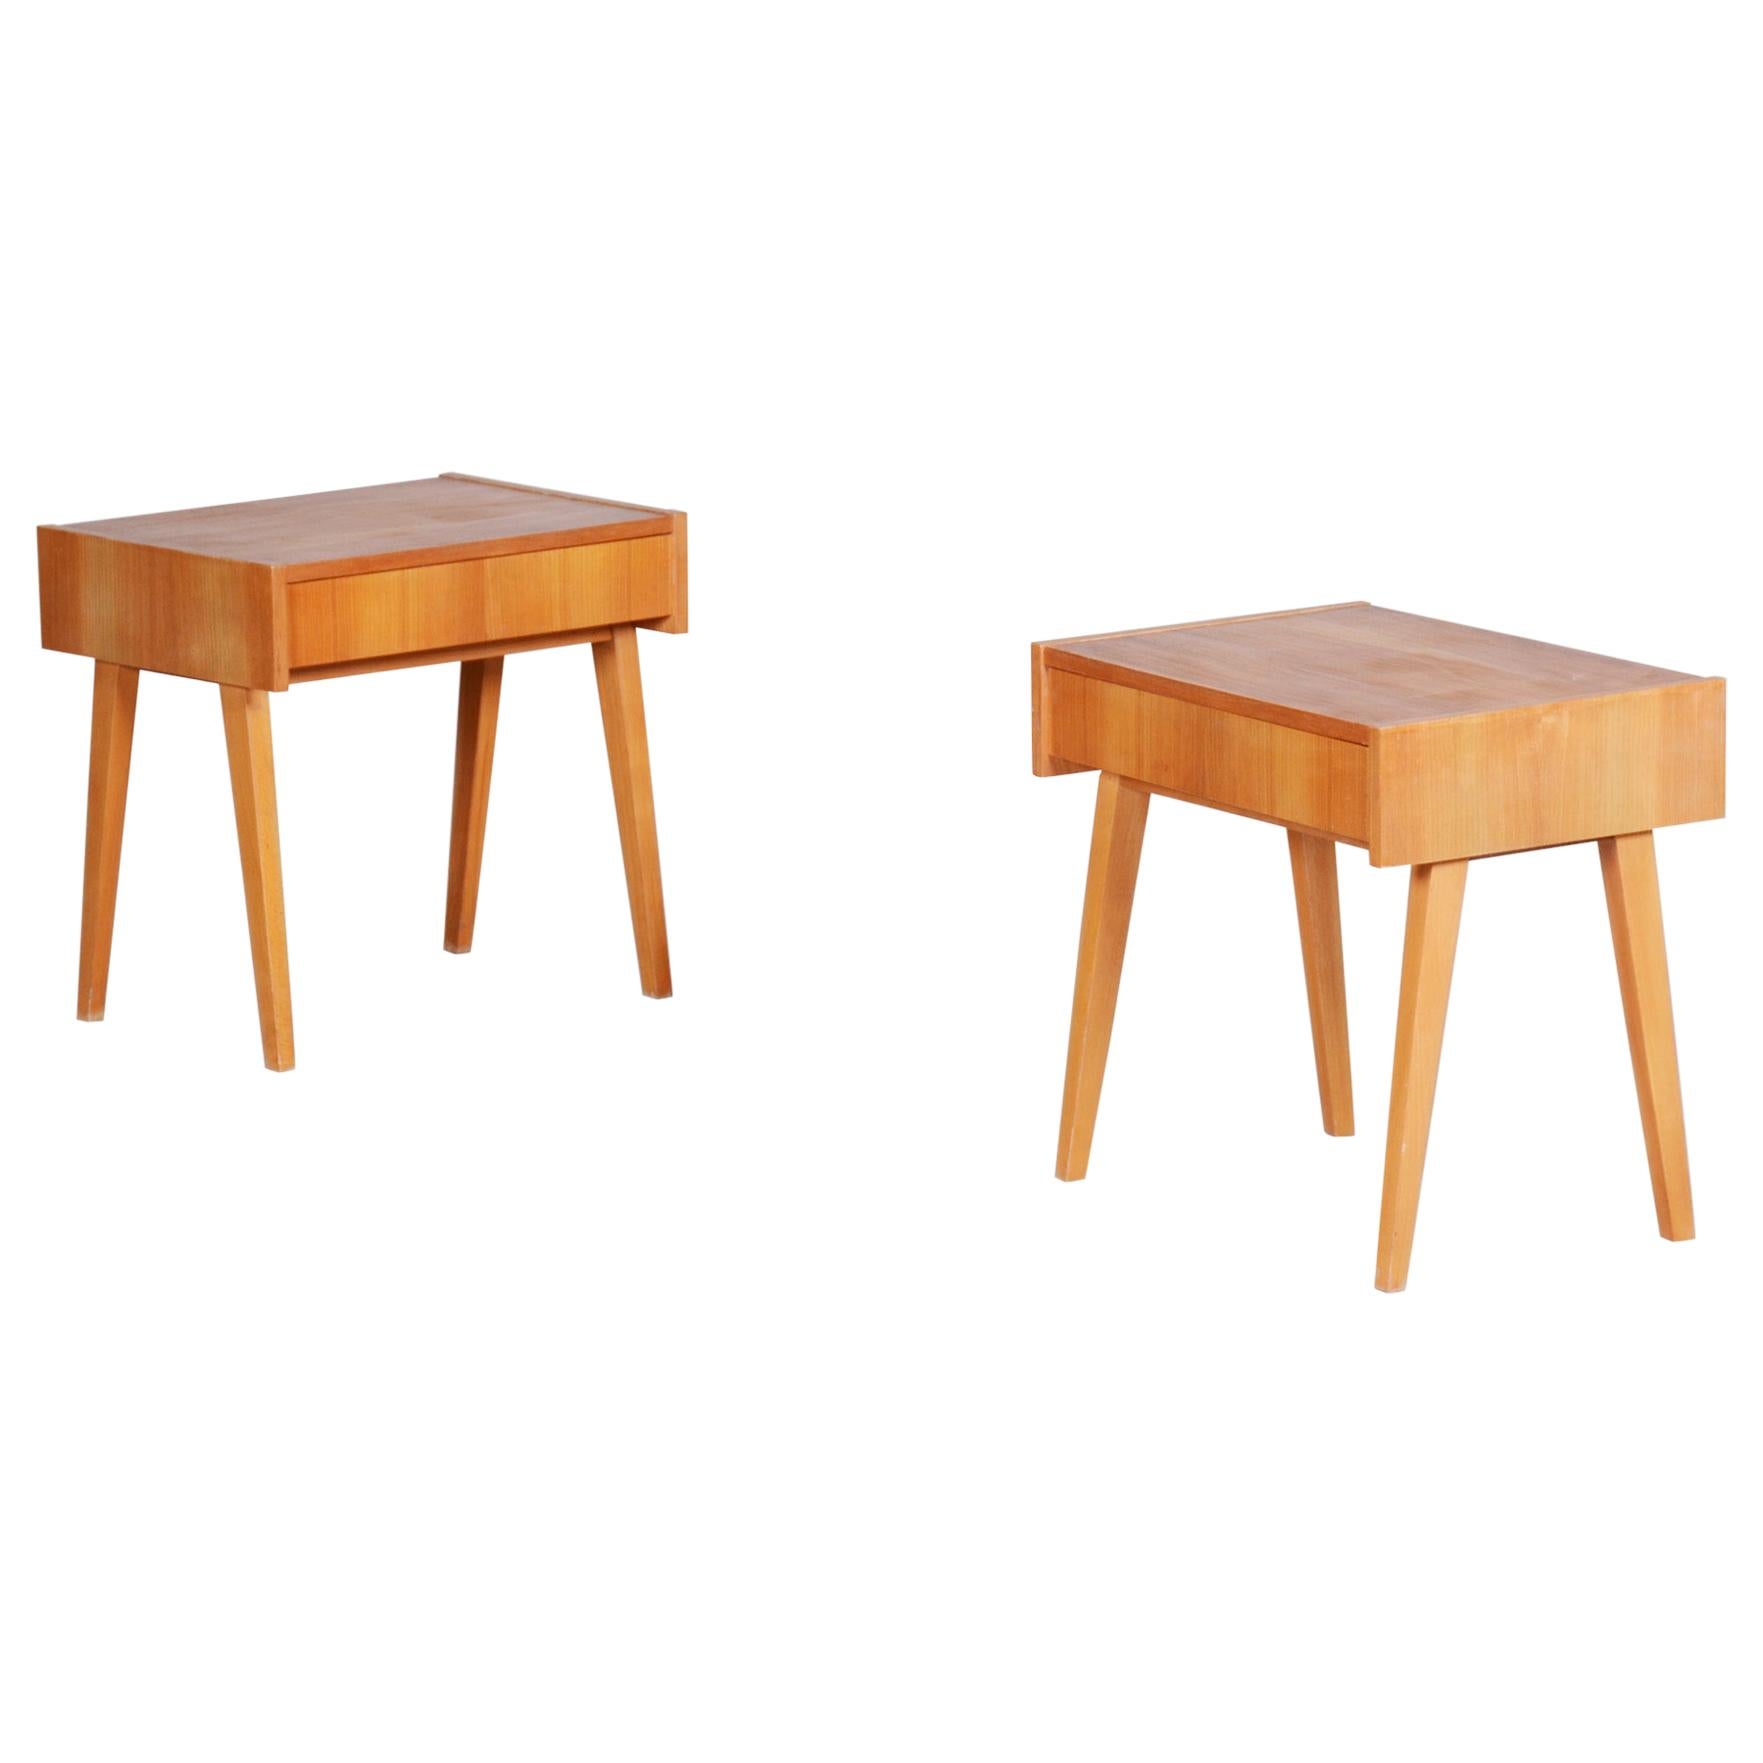 Pair of Ash Brown Midcentury Modeern Bedside Tables Made in Czechia, 1950s